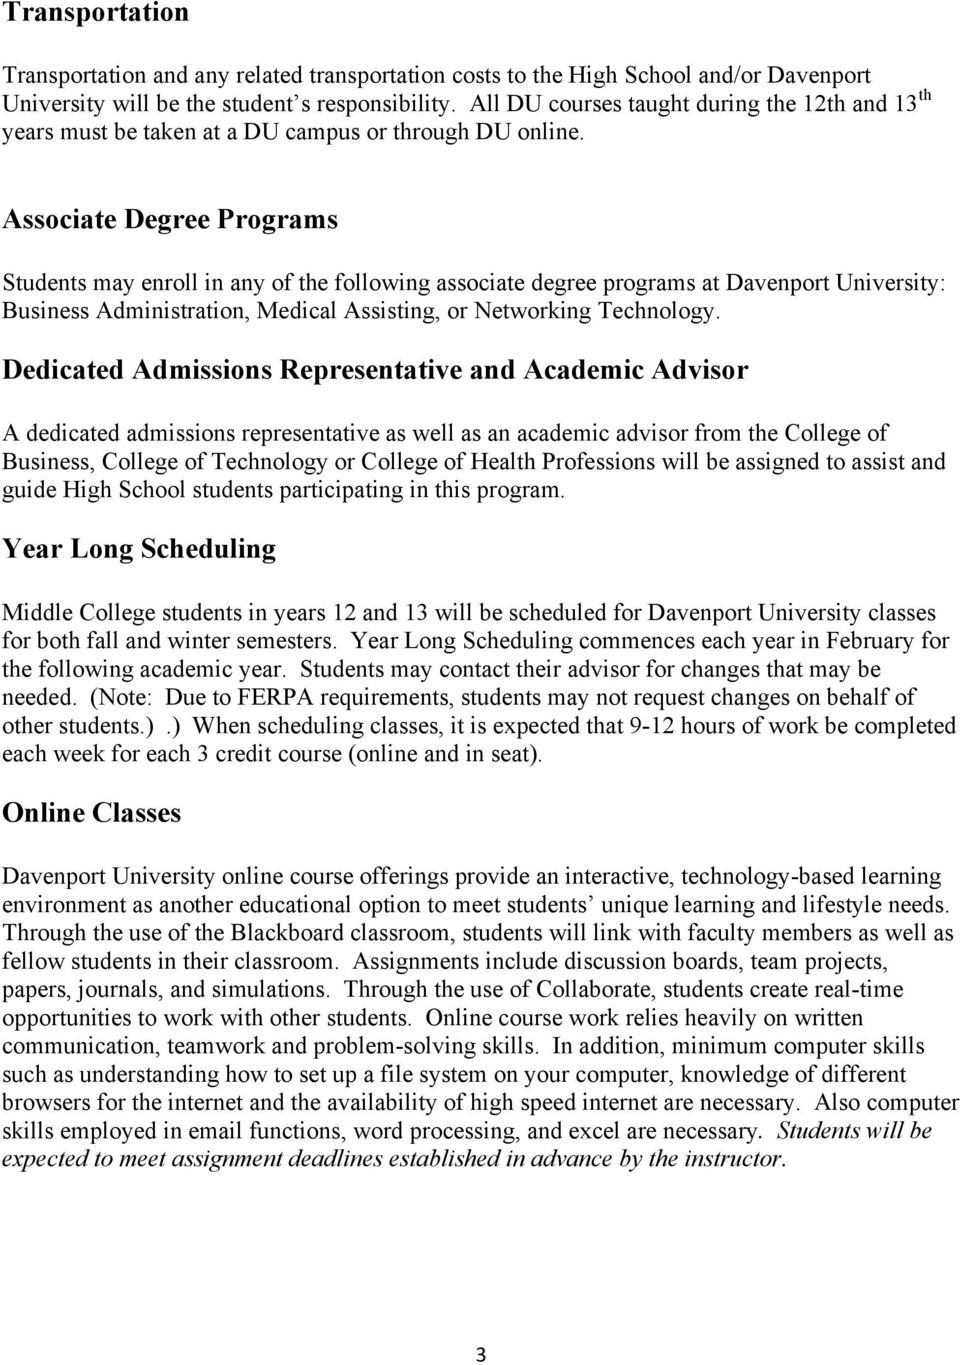 Associate Degree Programs Students may enroll in any of the following associate degree programs at Davenport University: Business Administration, Medical Assisting, or Networking Technology.